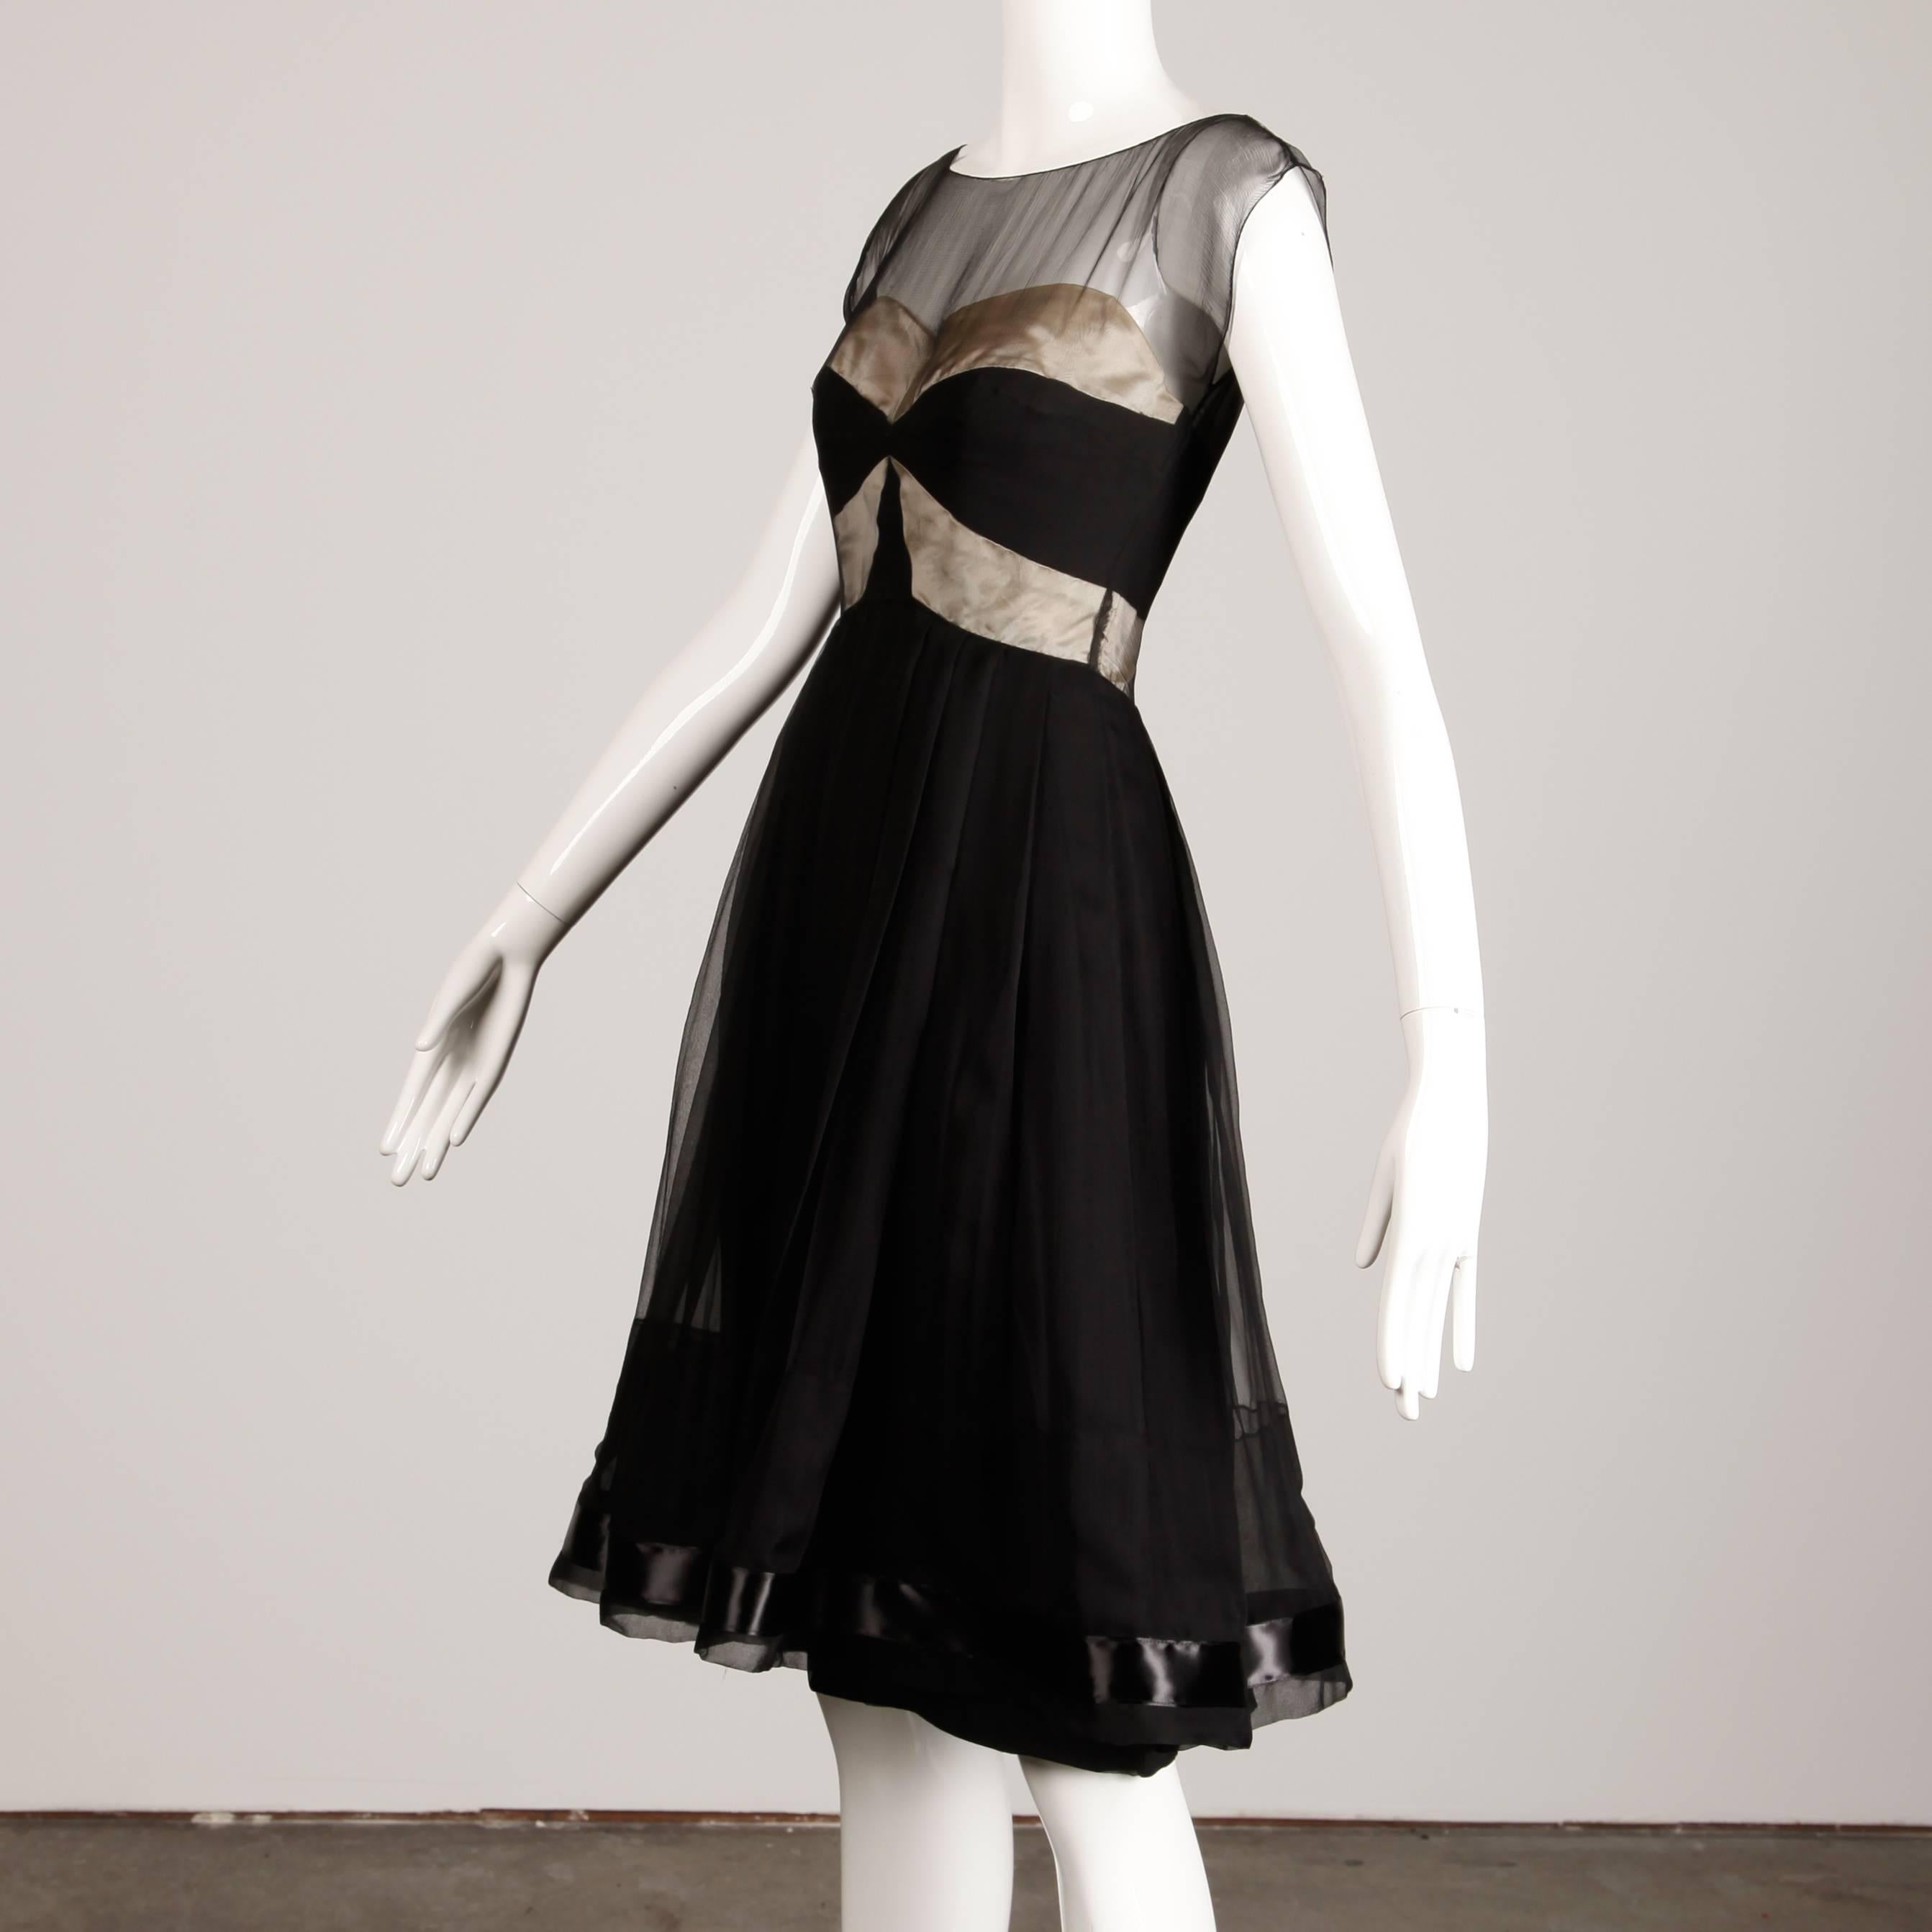 Stunning vintage early 1950s cocktail dress in black and nude silk satin and silk chiffon. Full skirt with silk lining and boned bodice. Gorgeous construction. Rear metal zip and hook closure. Fits like a modern size XS-S. The bust measures 33